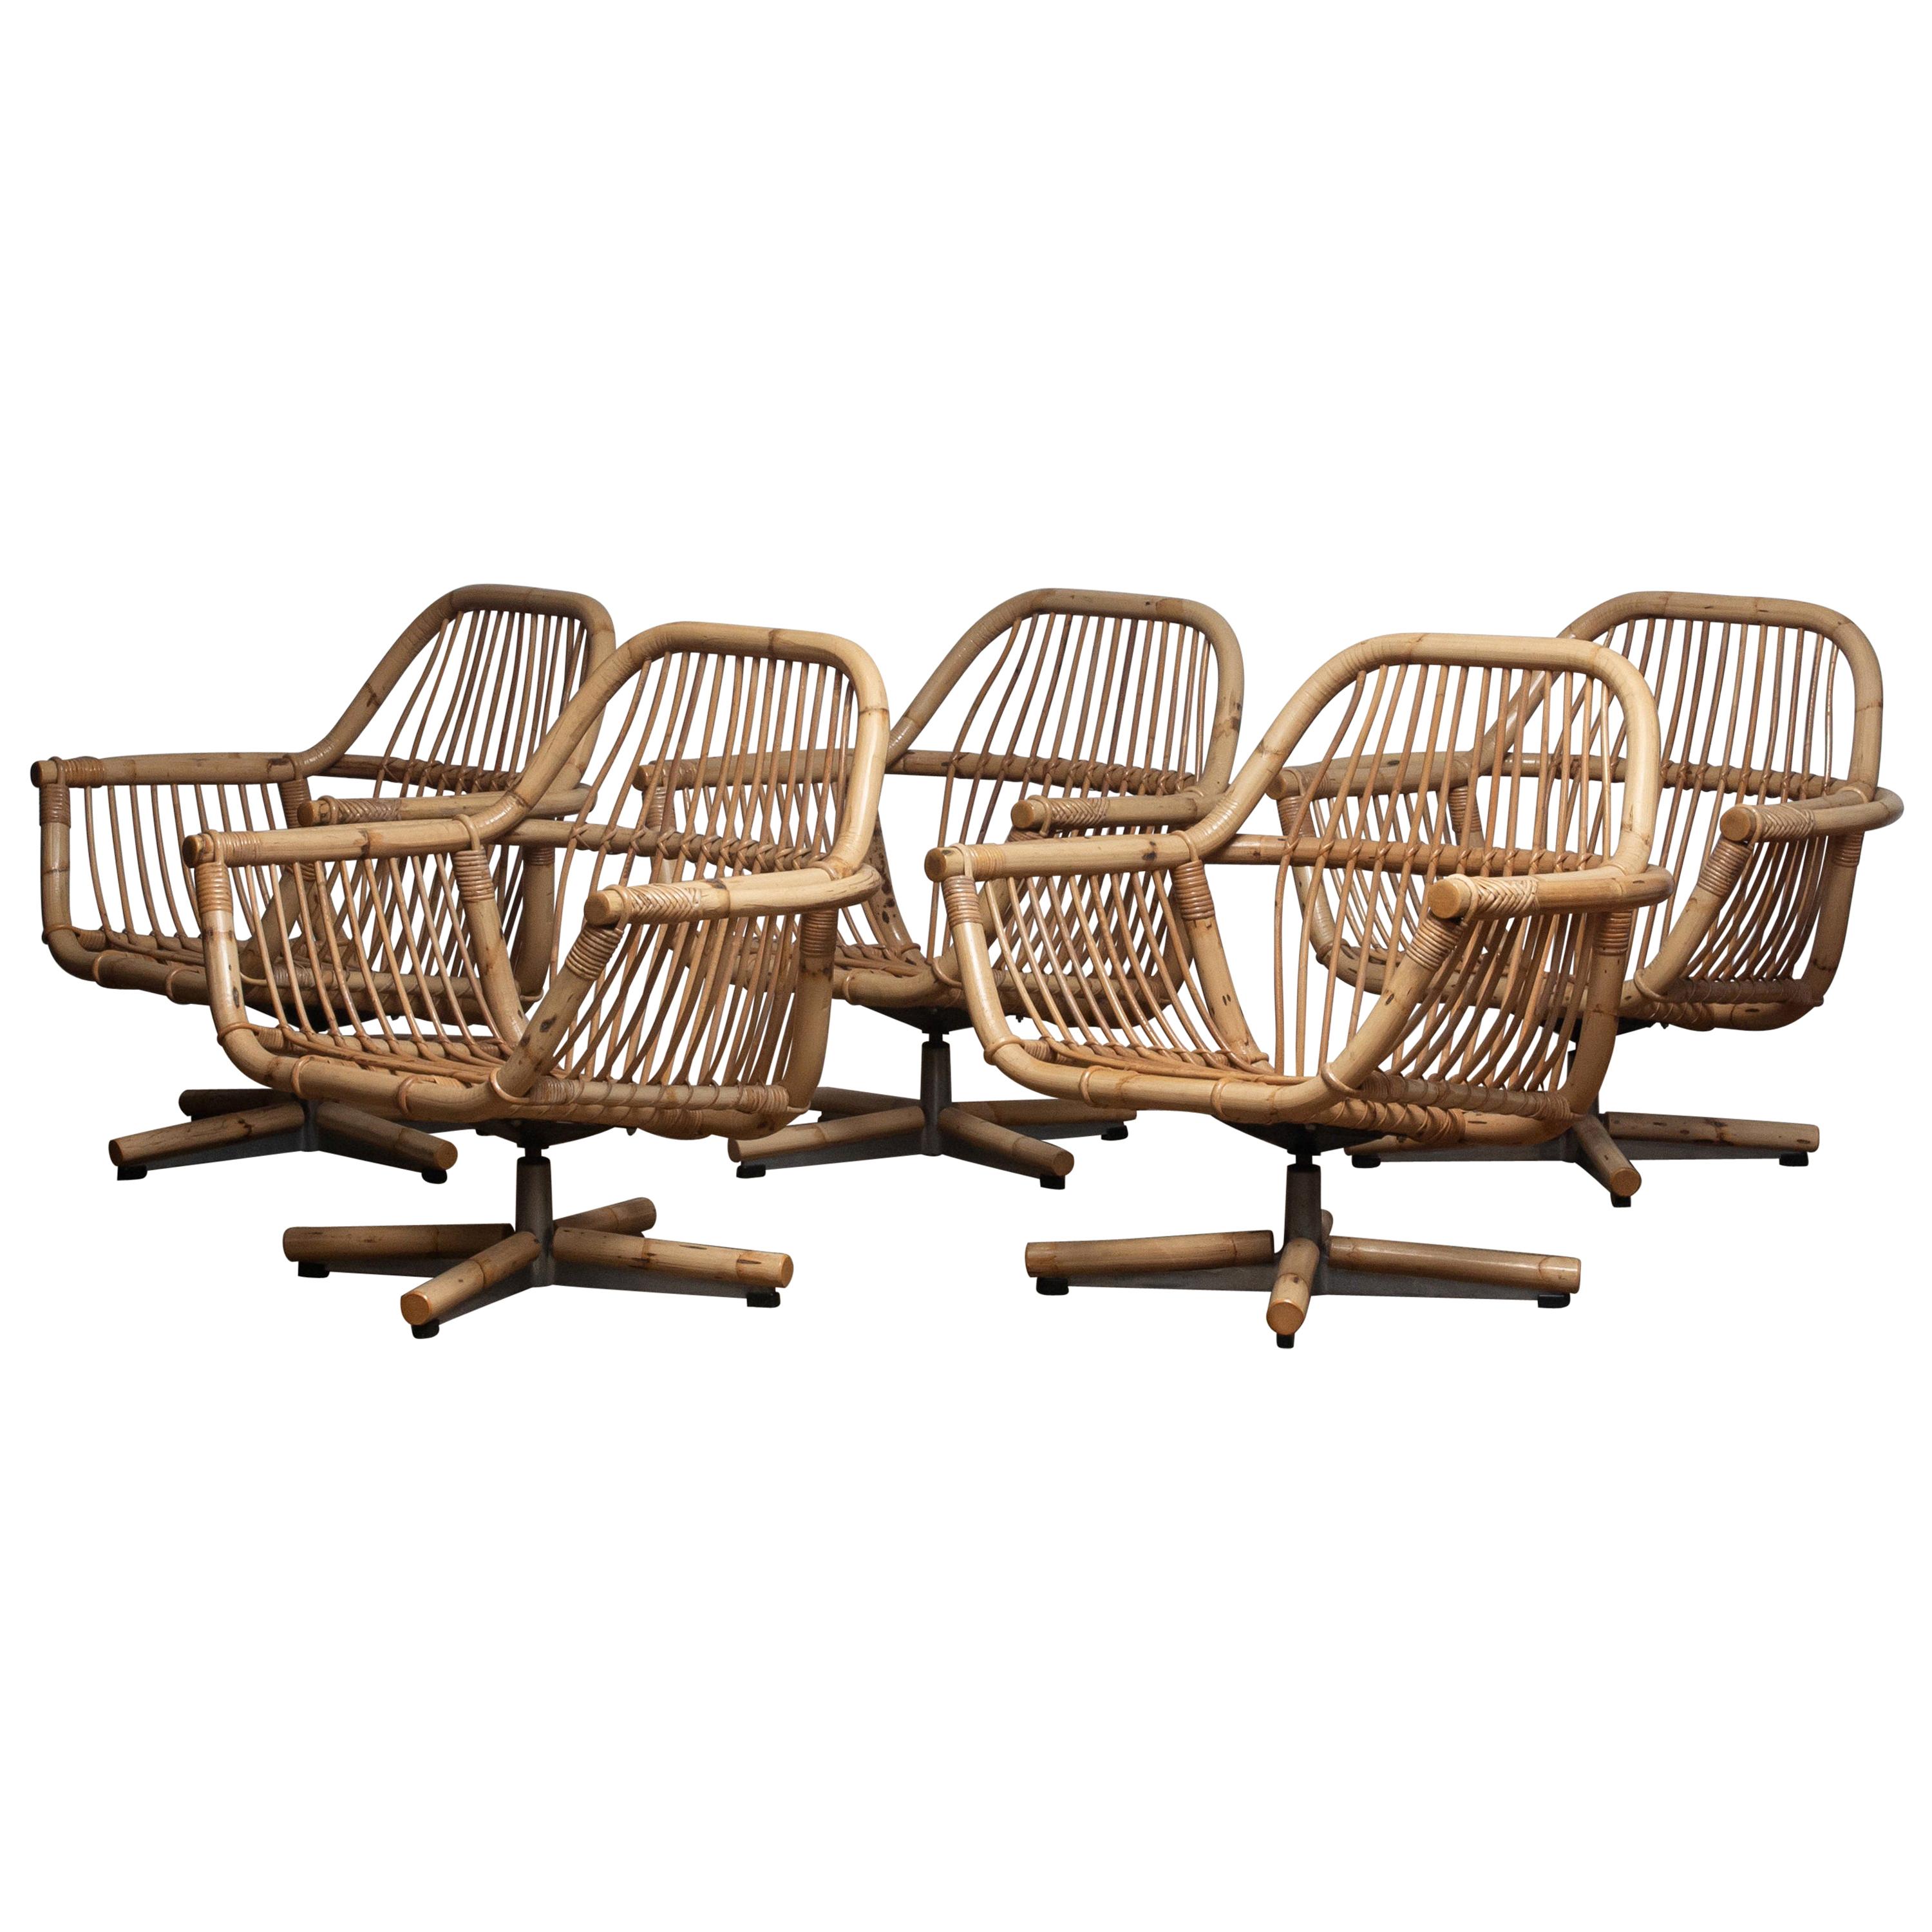 Extremely beautiful and rare Scandinavian garden set or lounge set consisting five rattan swivel chairs (on an aluminum stand) and one coffee table all in original and good condition.
Made in Sweden in the 1960s.
Sizes of the five chairs are for